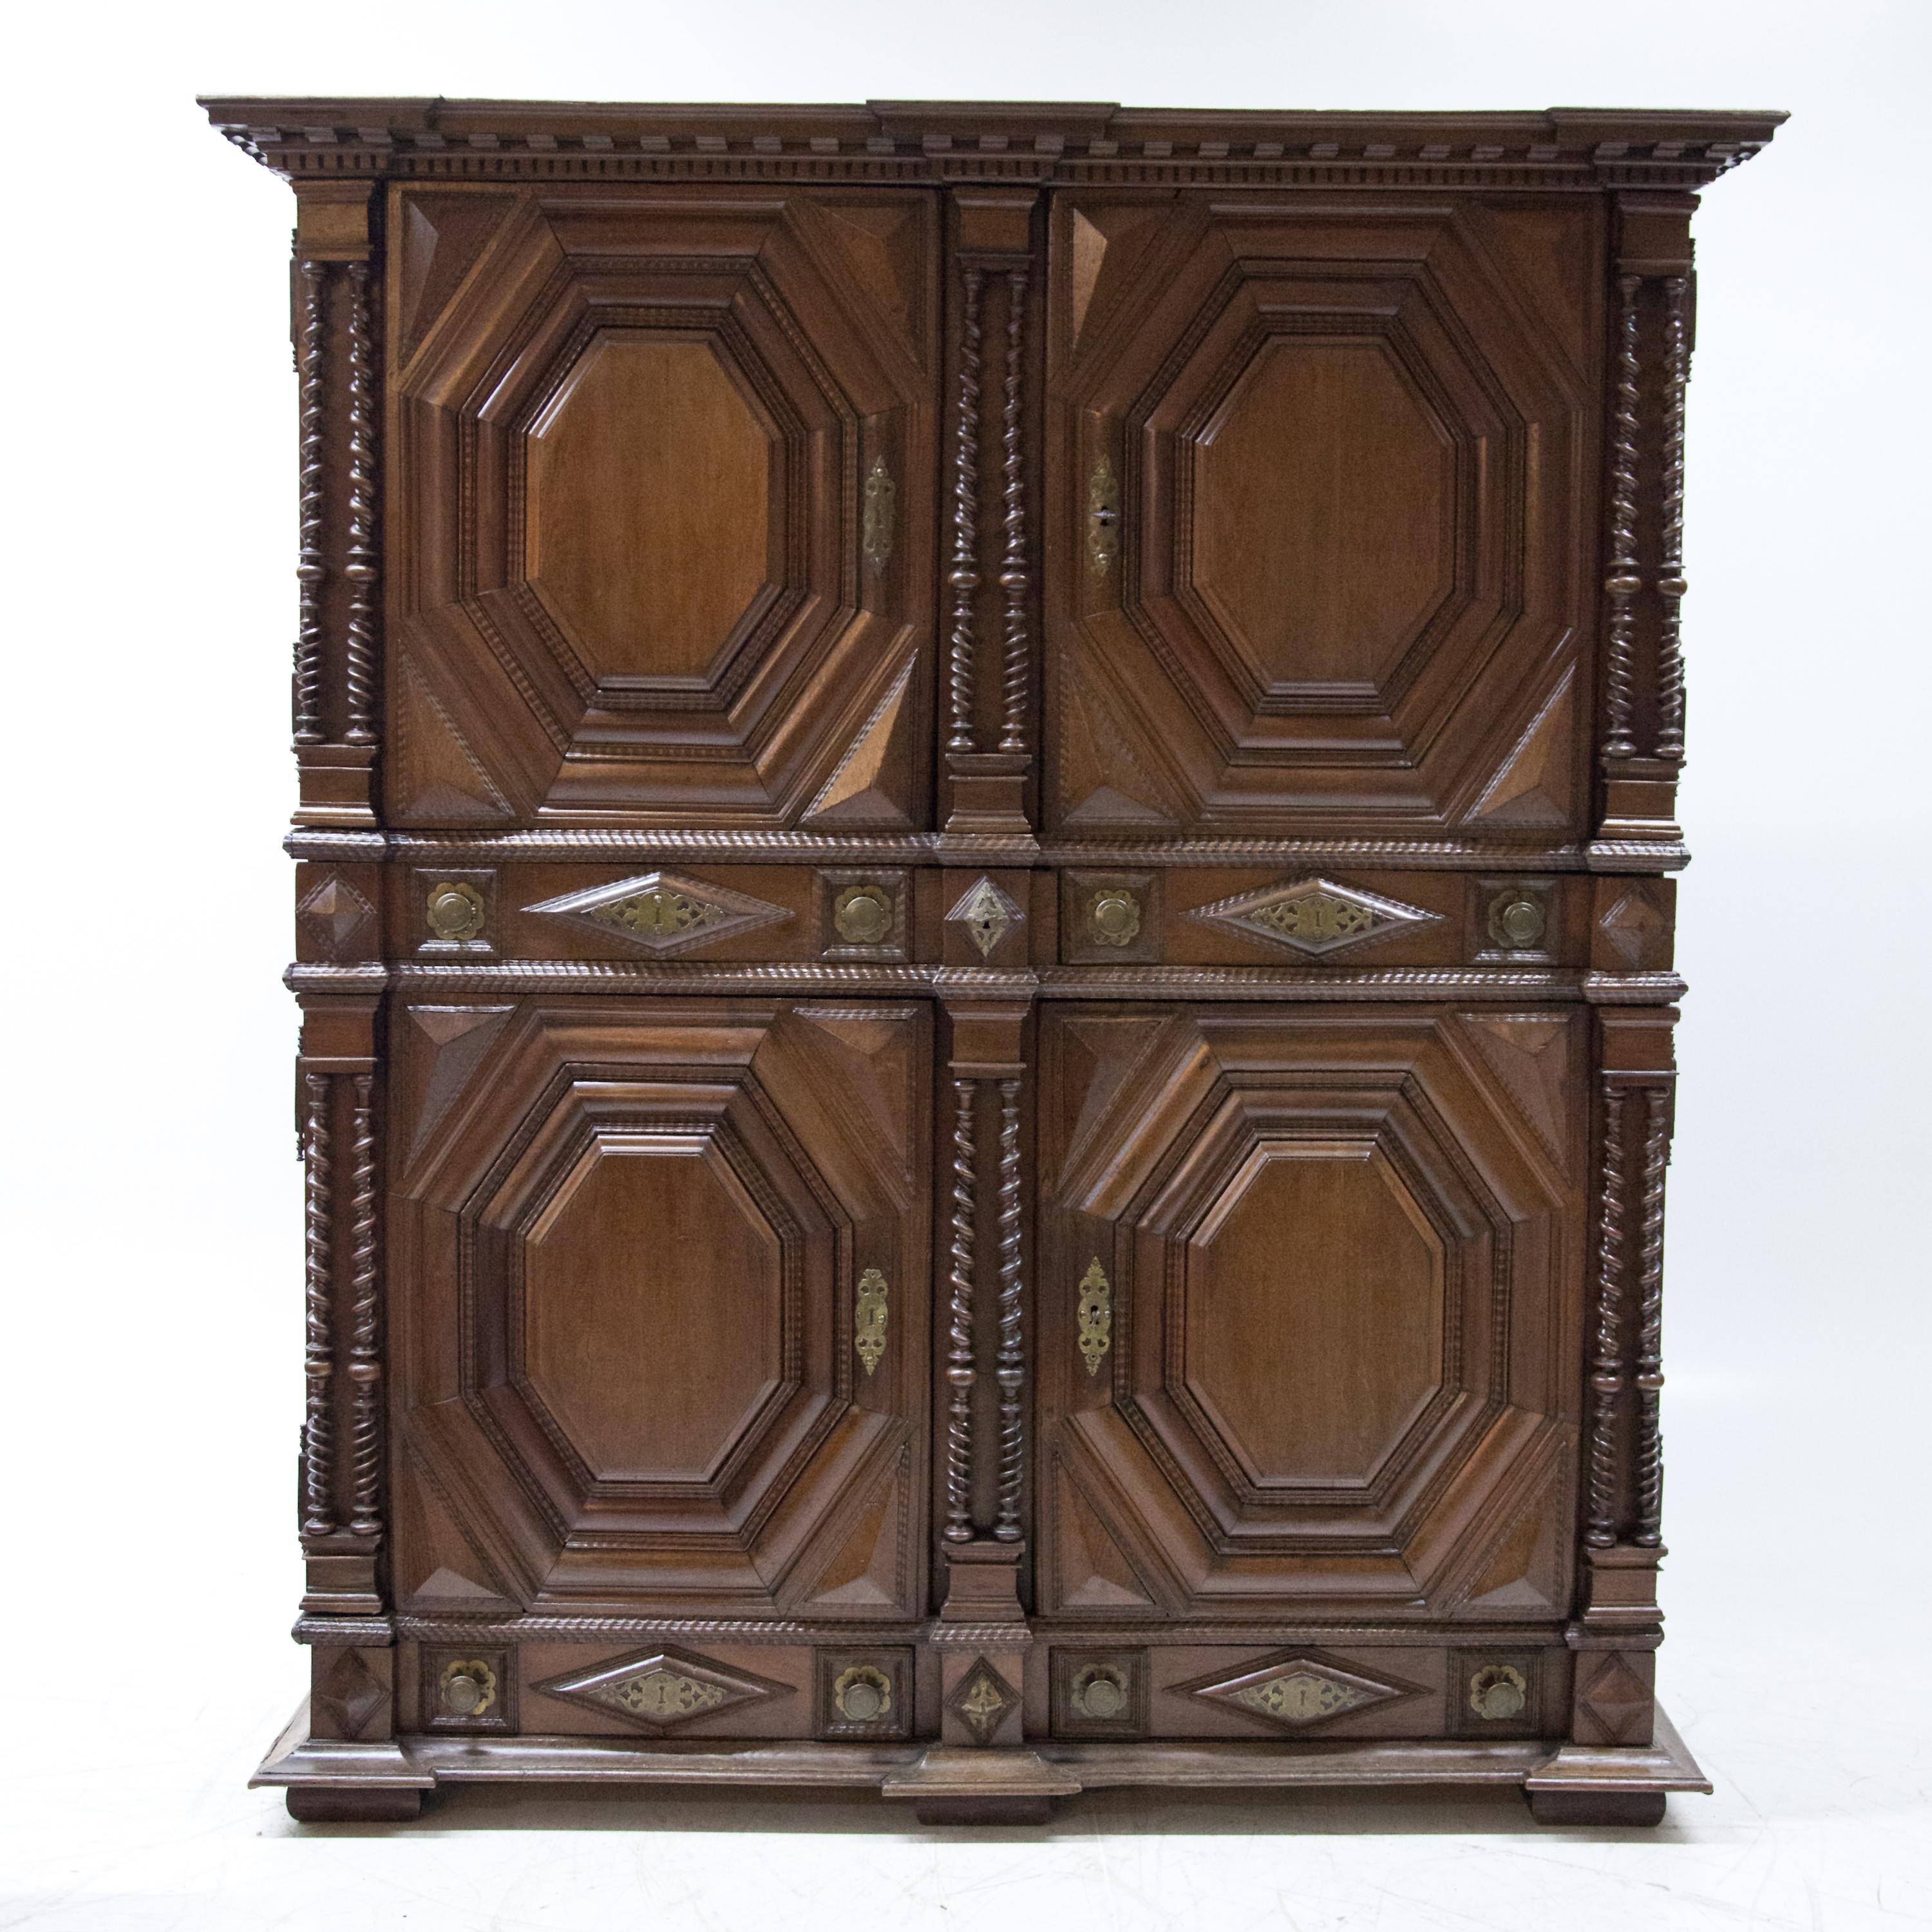 Large four-door oak cabinet with twisted double columns and multi-profiled cushion-shaped panels. The corners and stop are cranked and the flat cornice is decorated with a dentil bed mould. Below the doors there are three drawers and two large